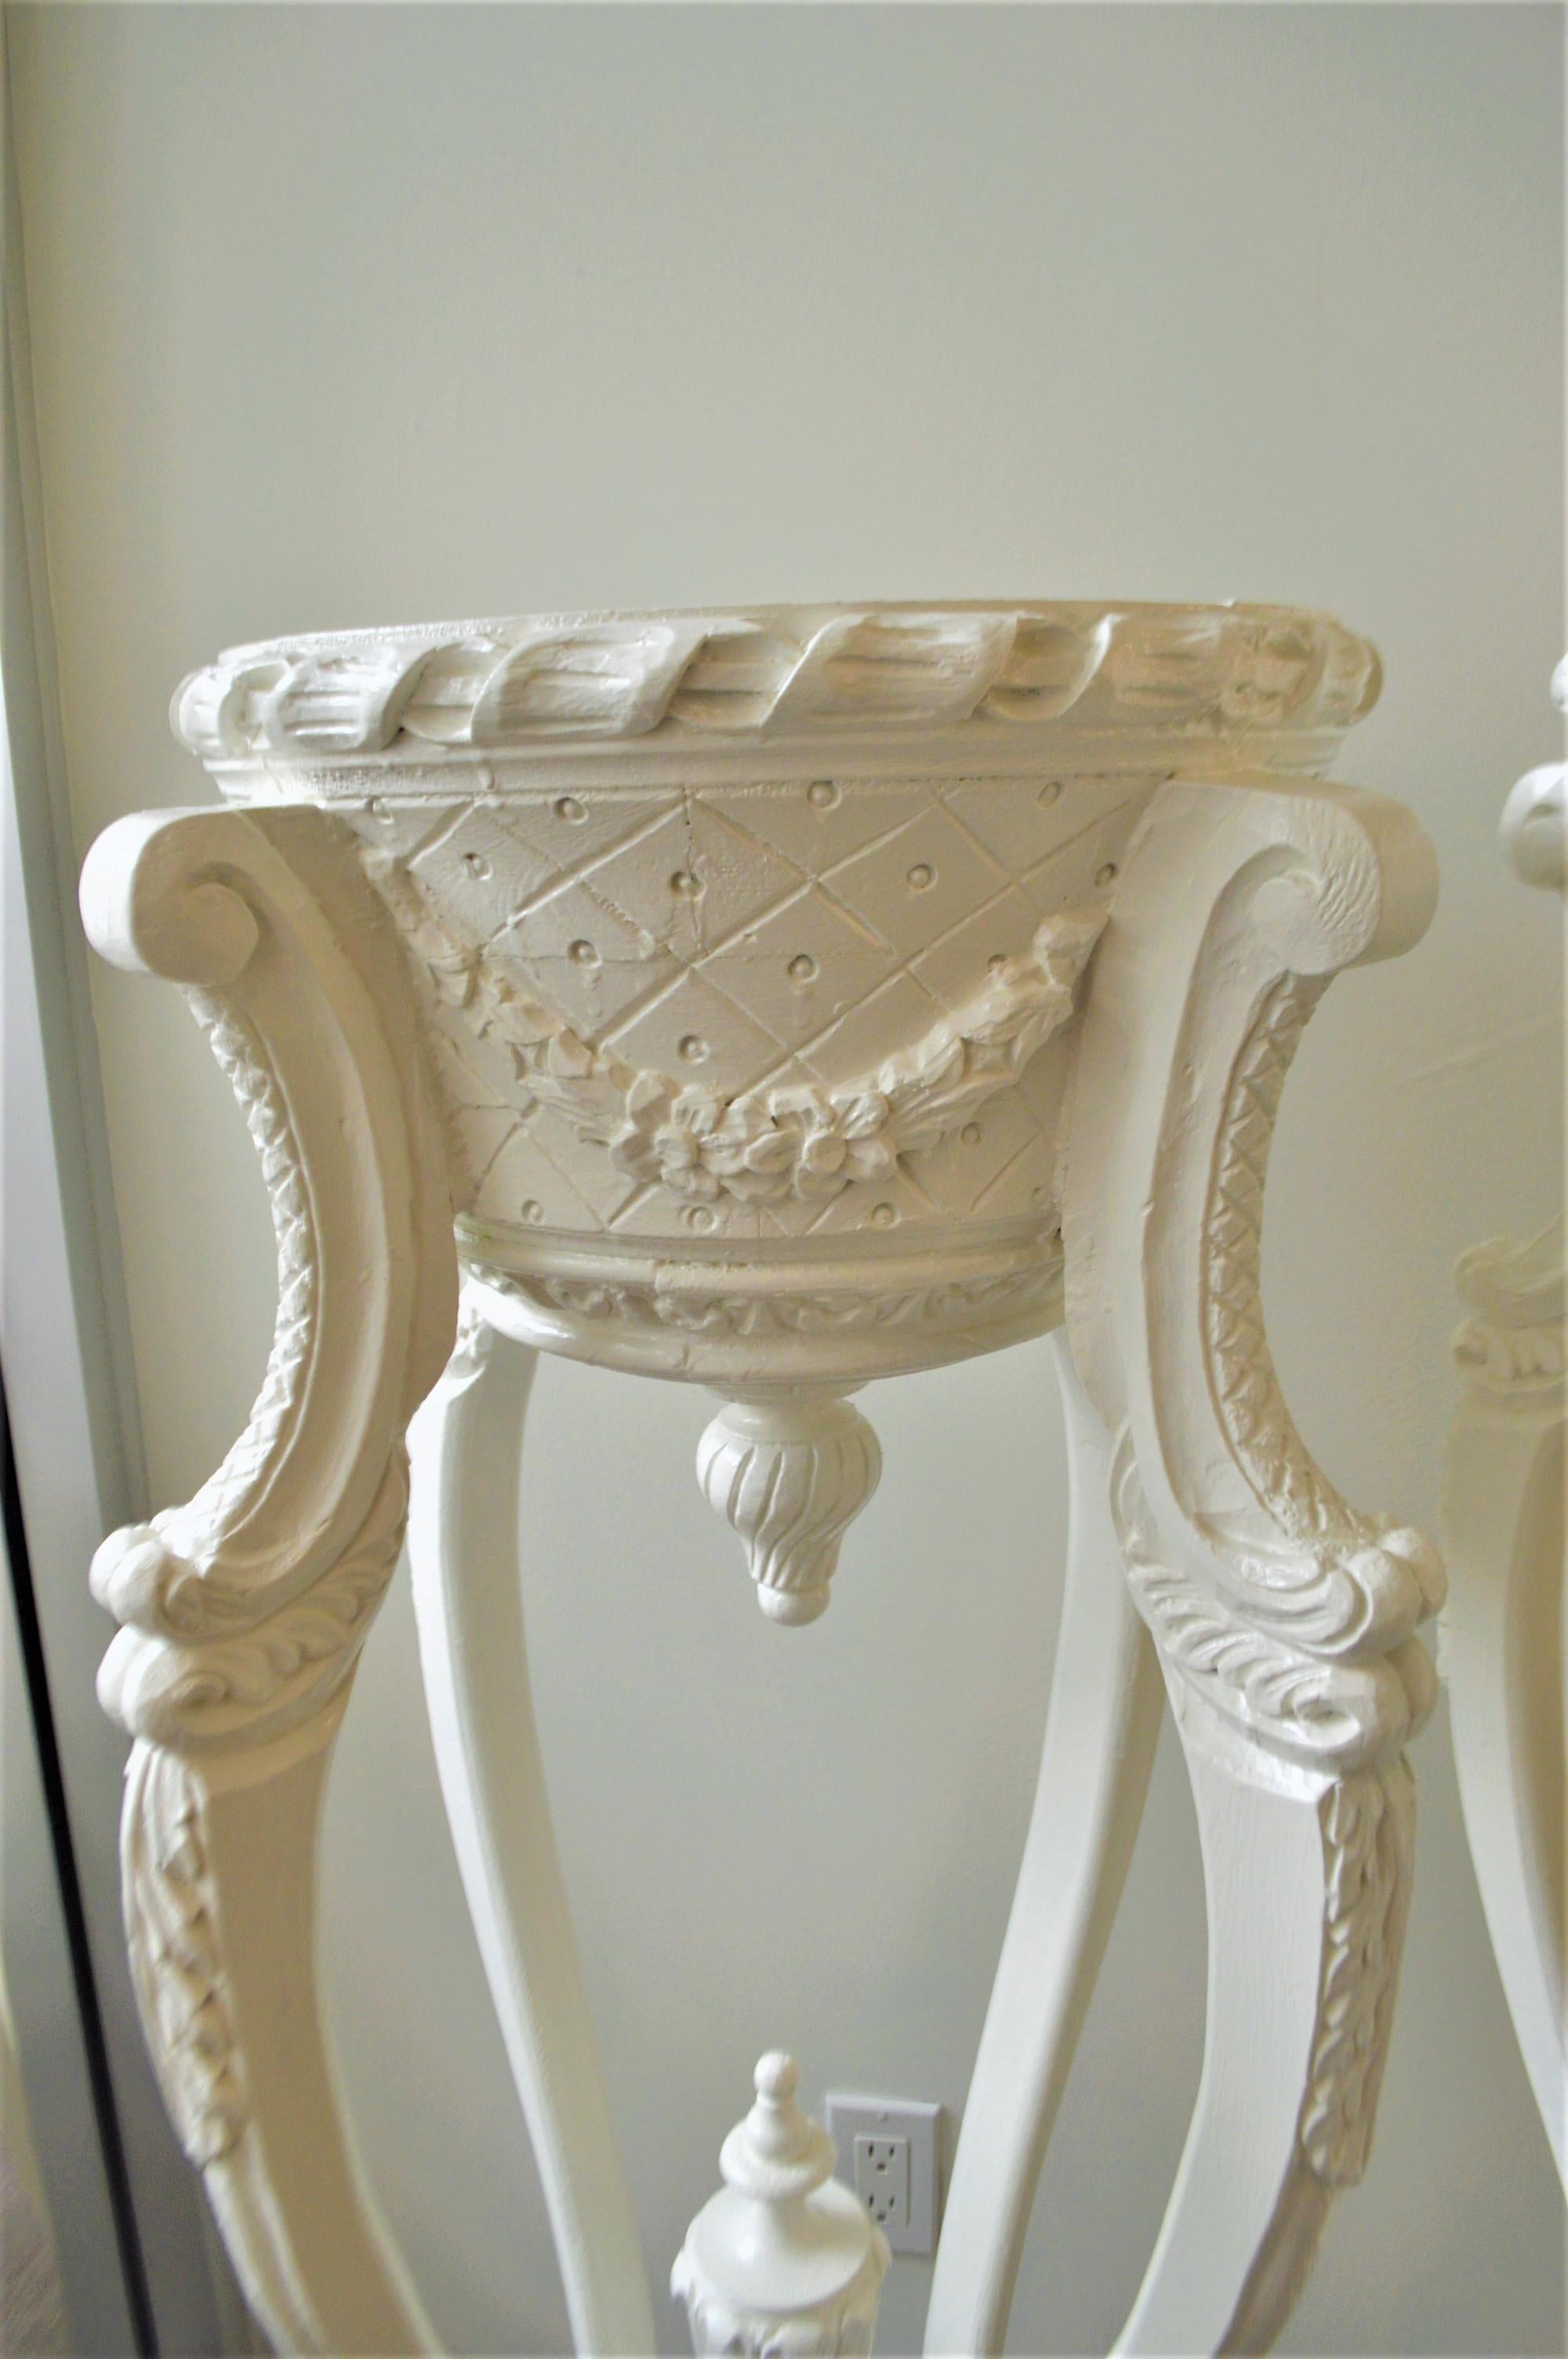 Most unusual pair of highly decorative white painted pedestals. They are versatile, with a marble top to display sculptures or without the marble will hold plants.
Great decorative pieces to flank entrance doors from a modern to traditional style